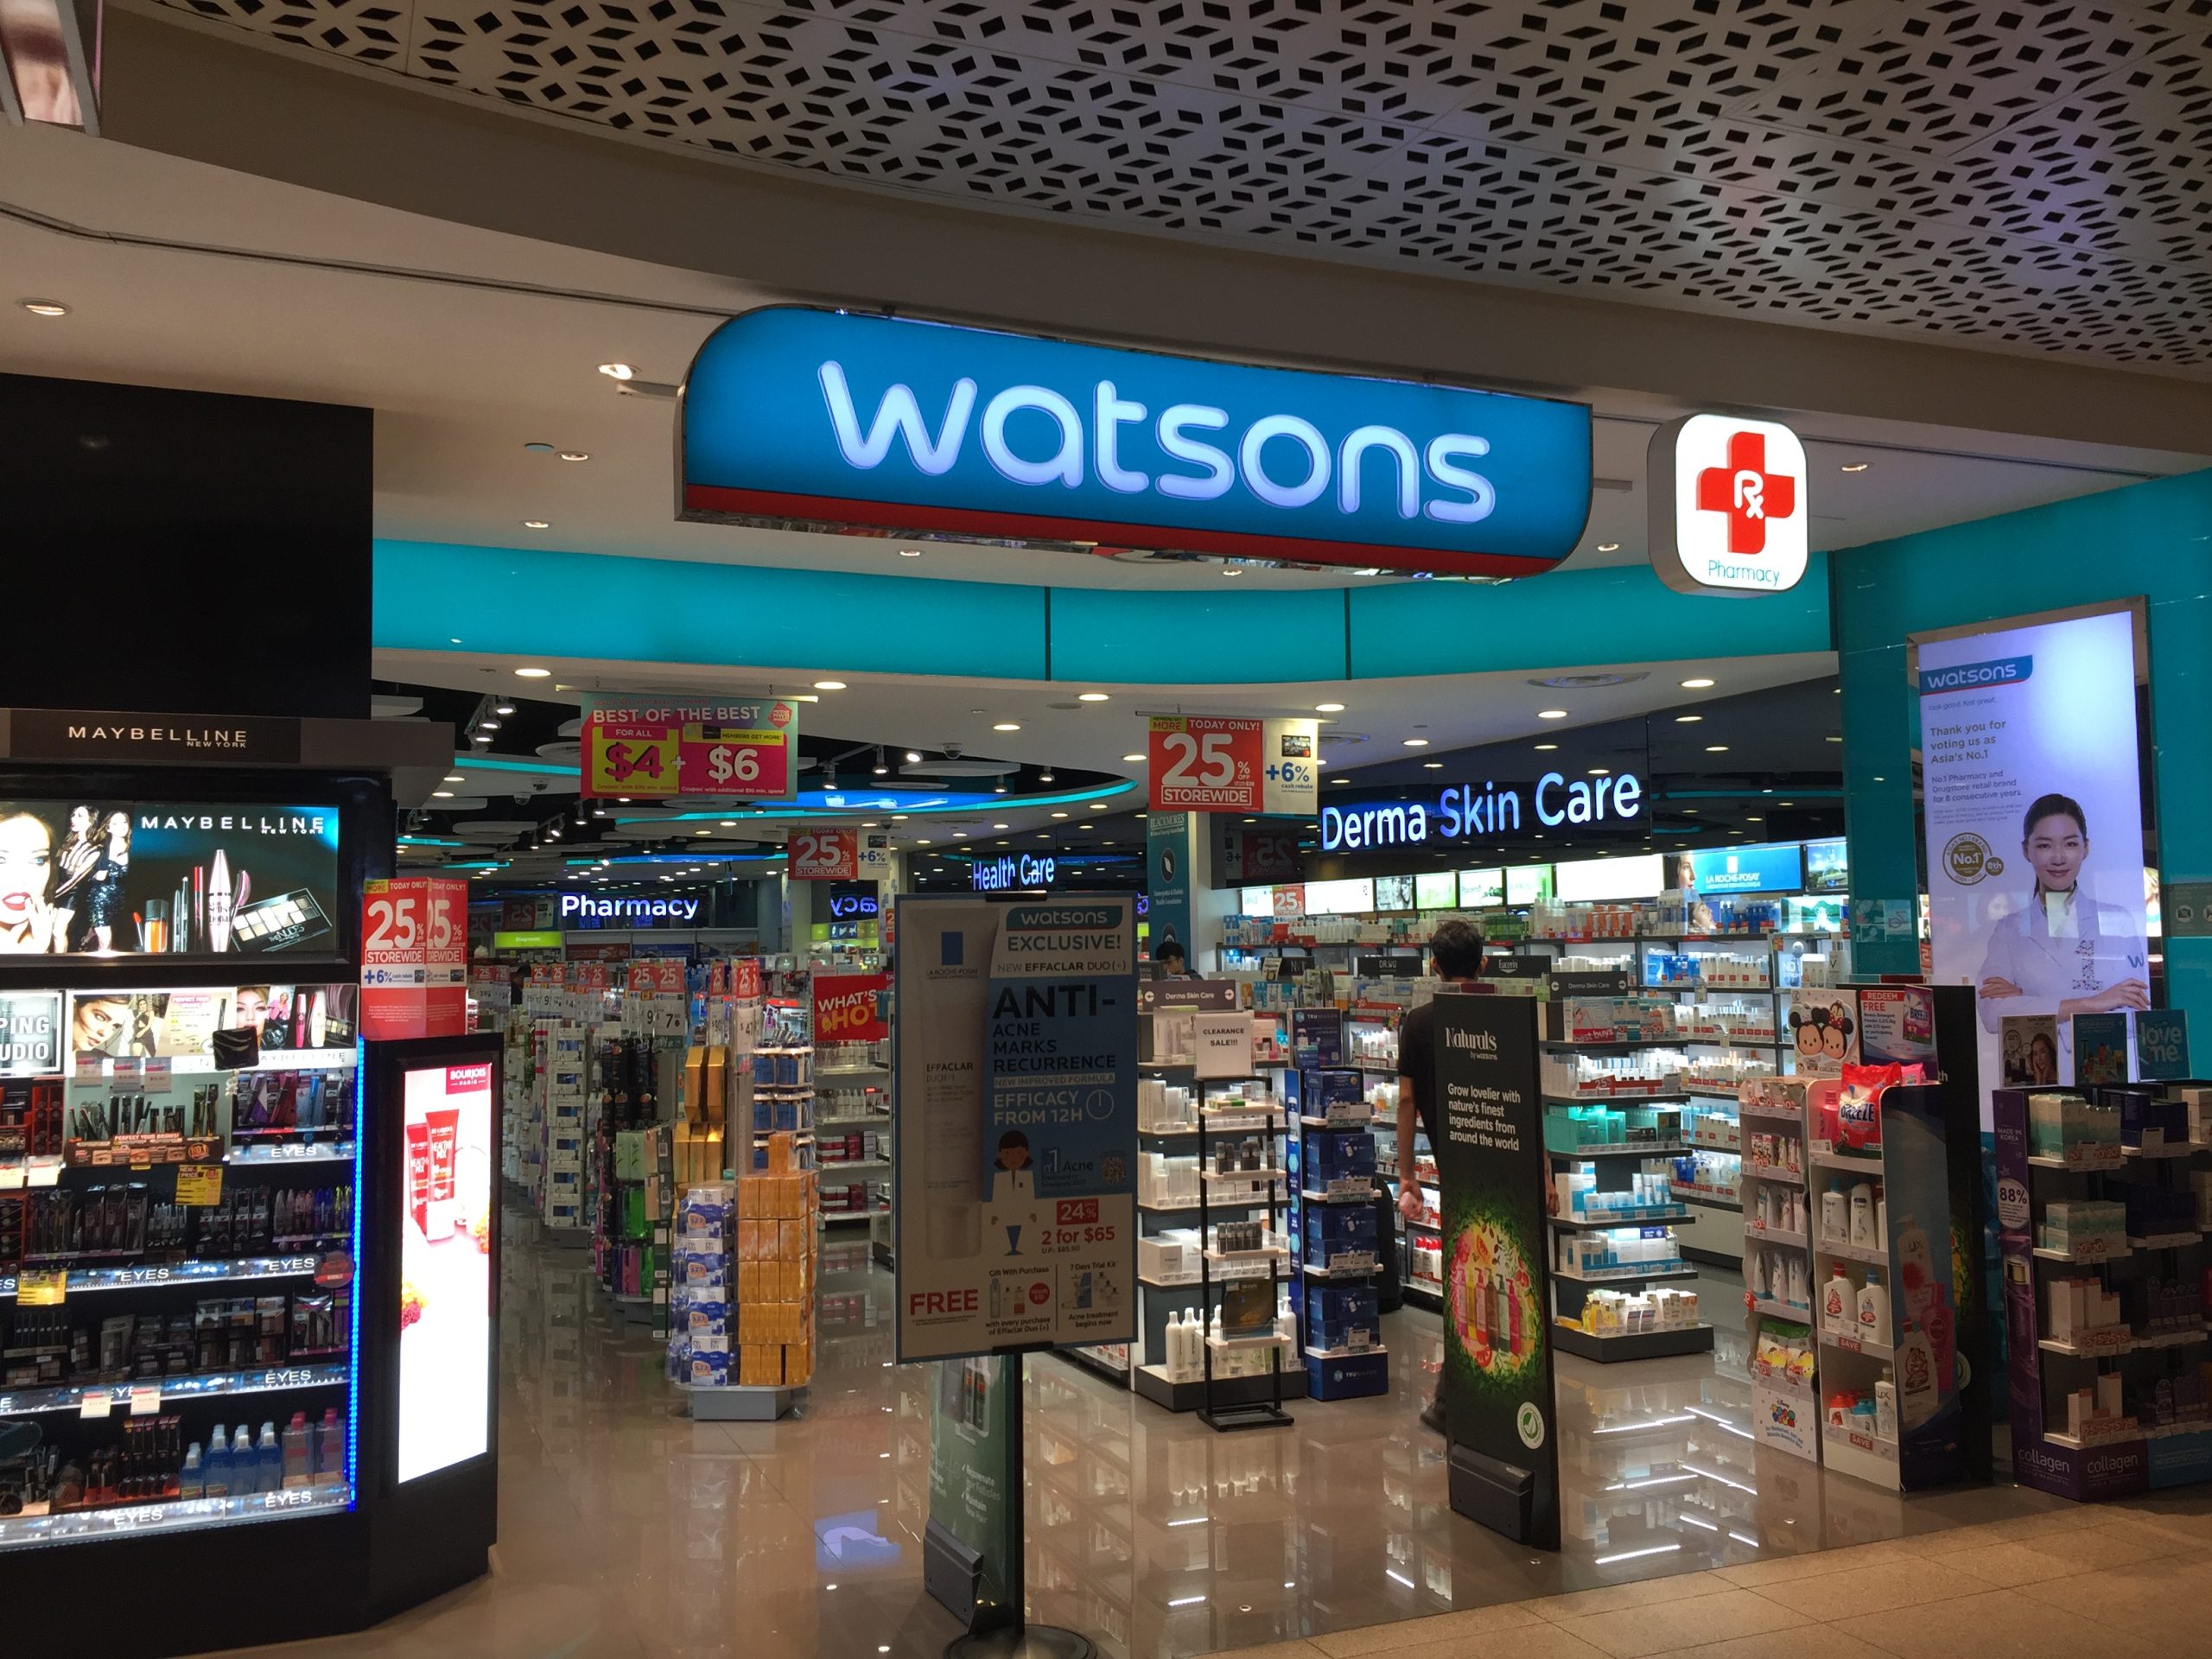 Pharmacy section at Watson's